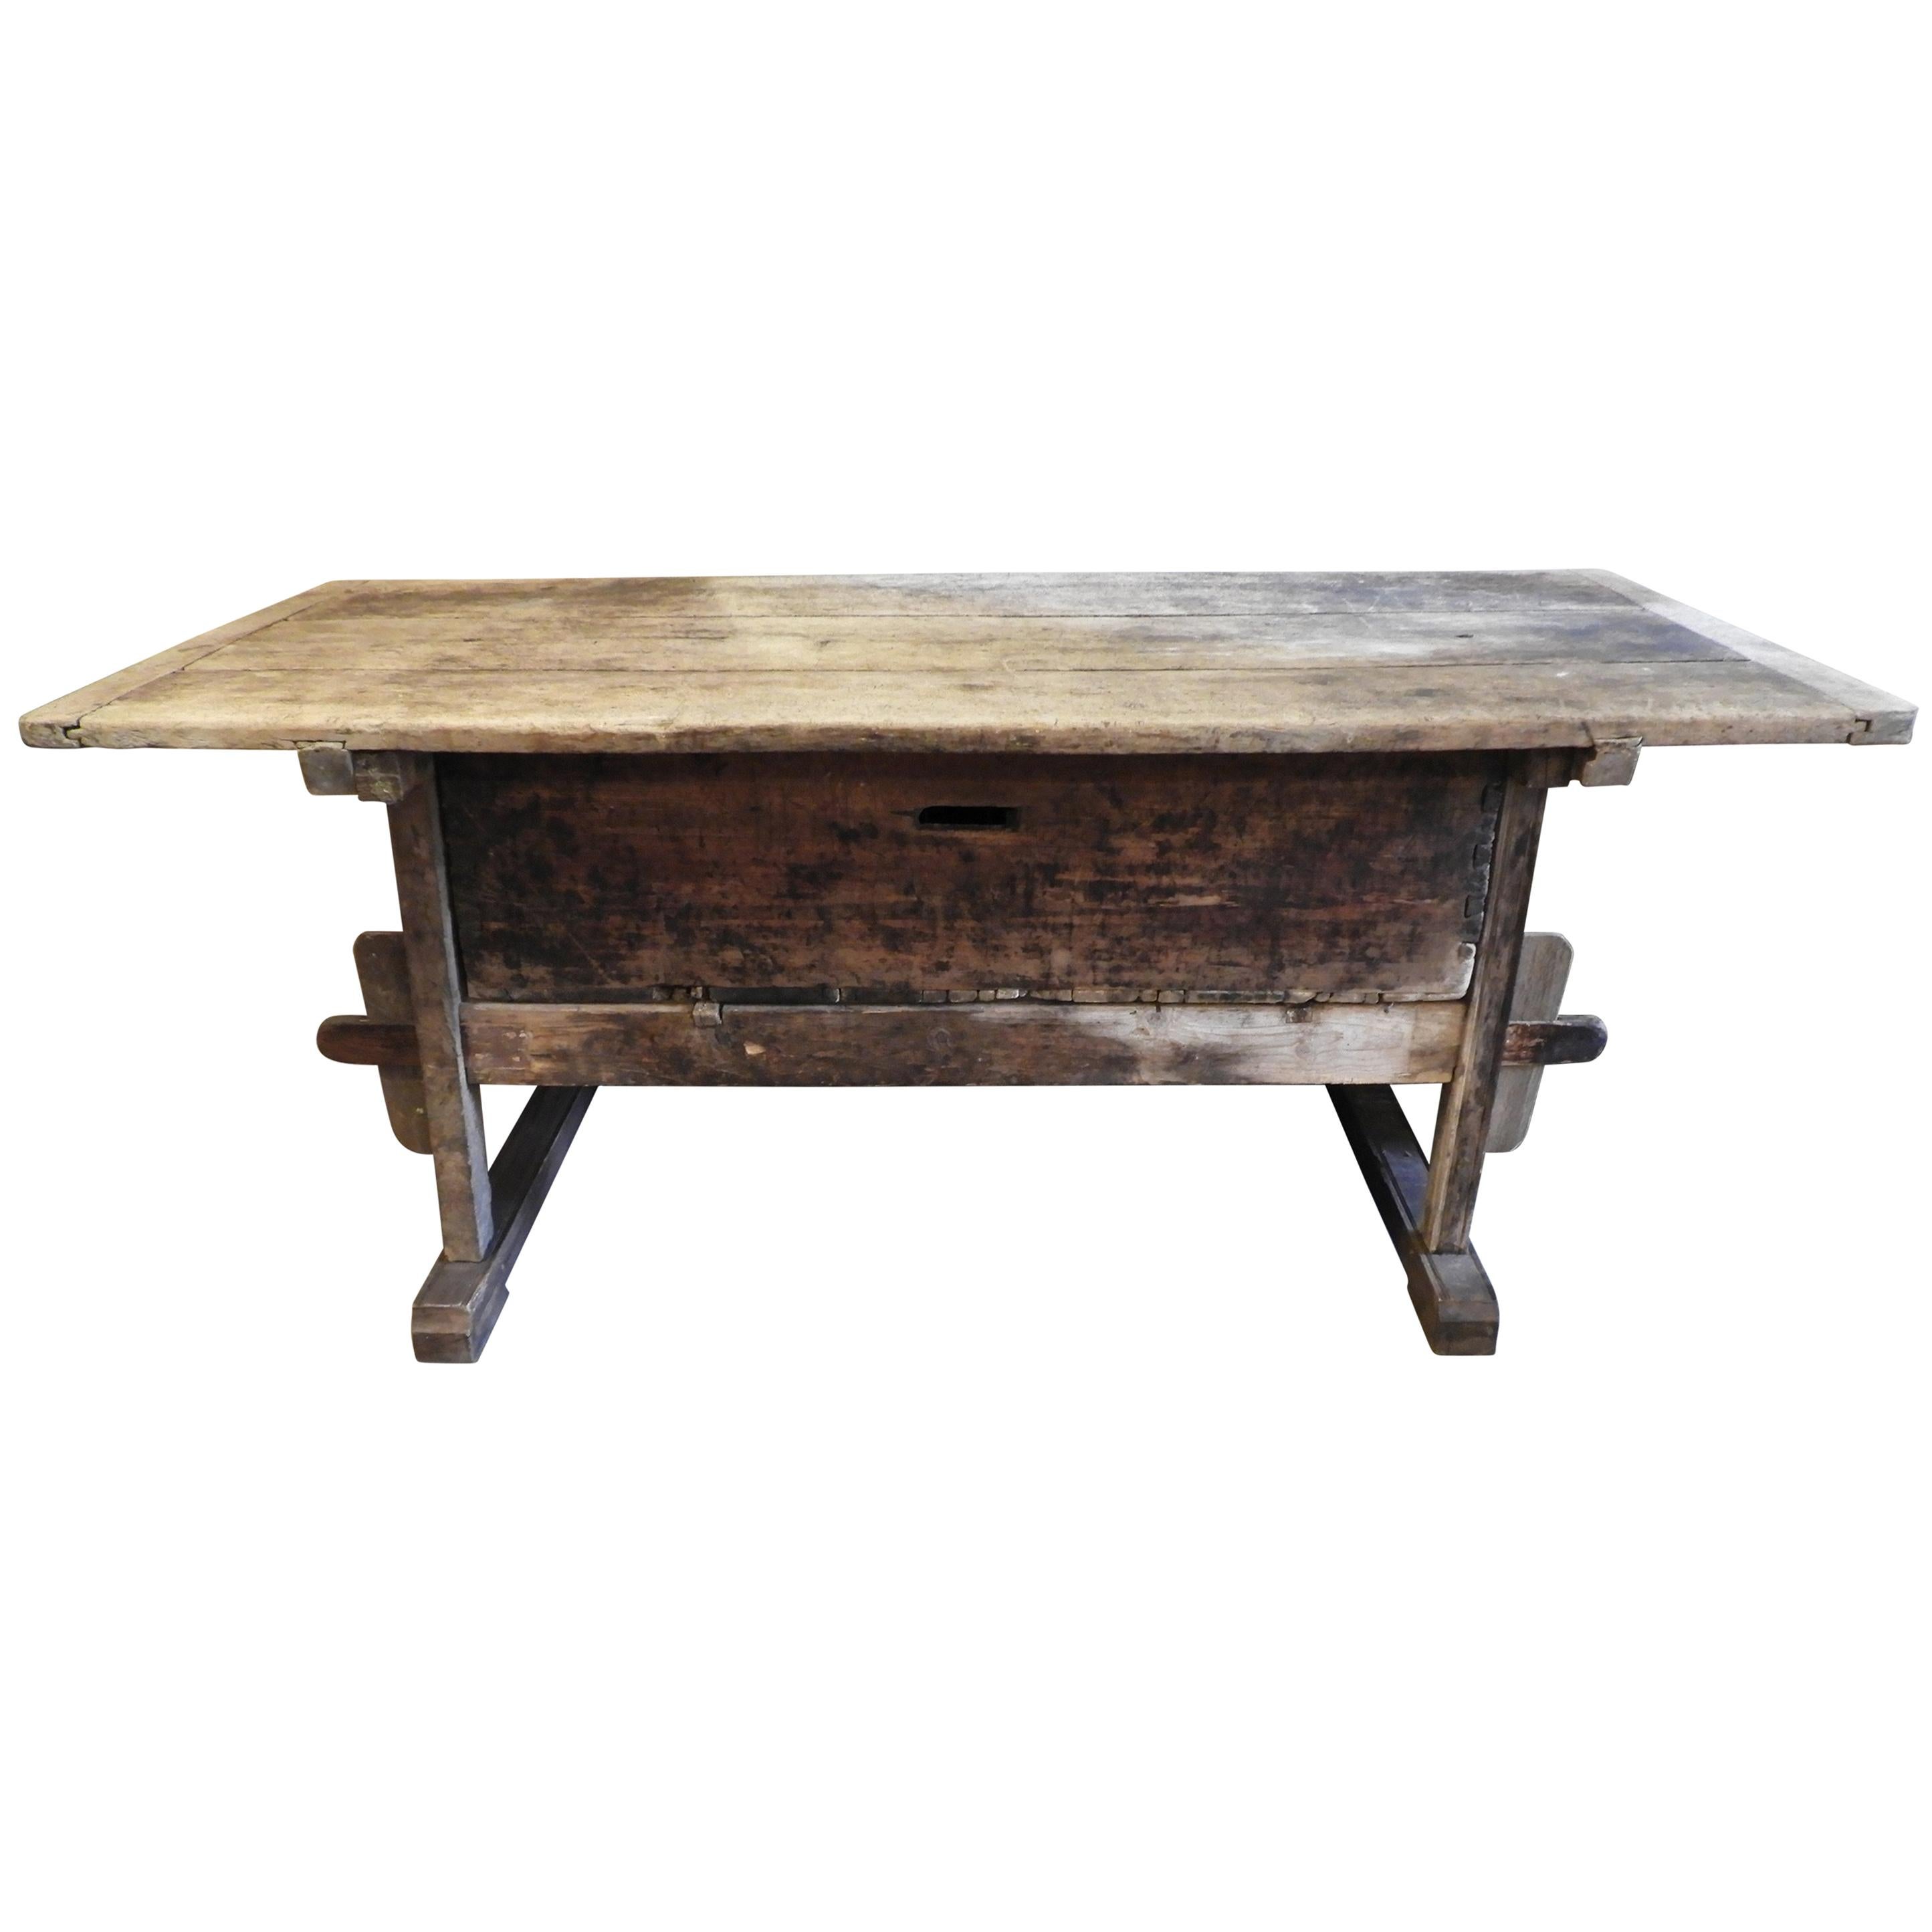 19th Century Italian Warn Pine and Poplar Country Side Table with Drawer